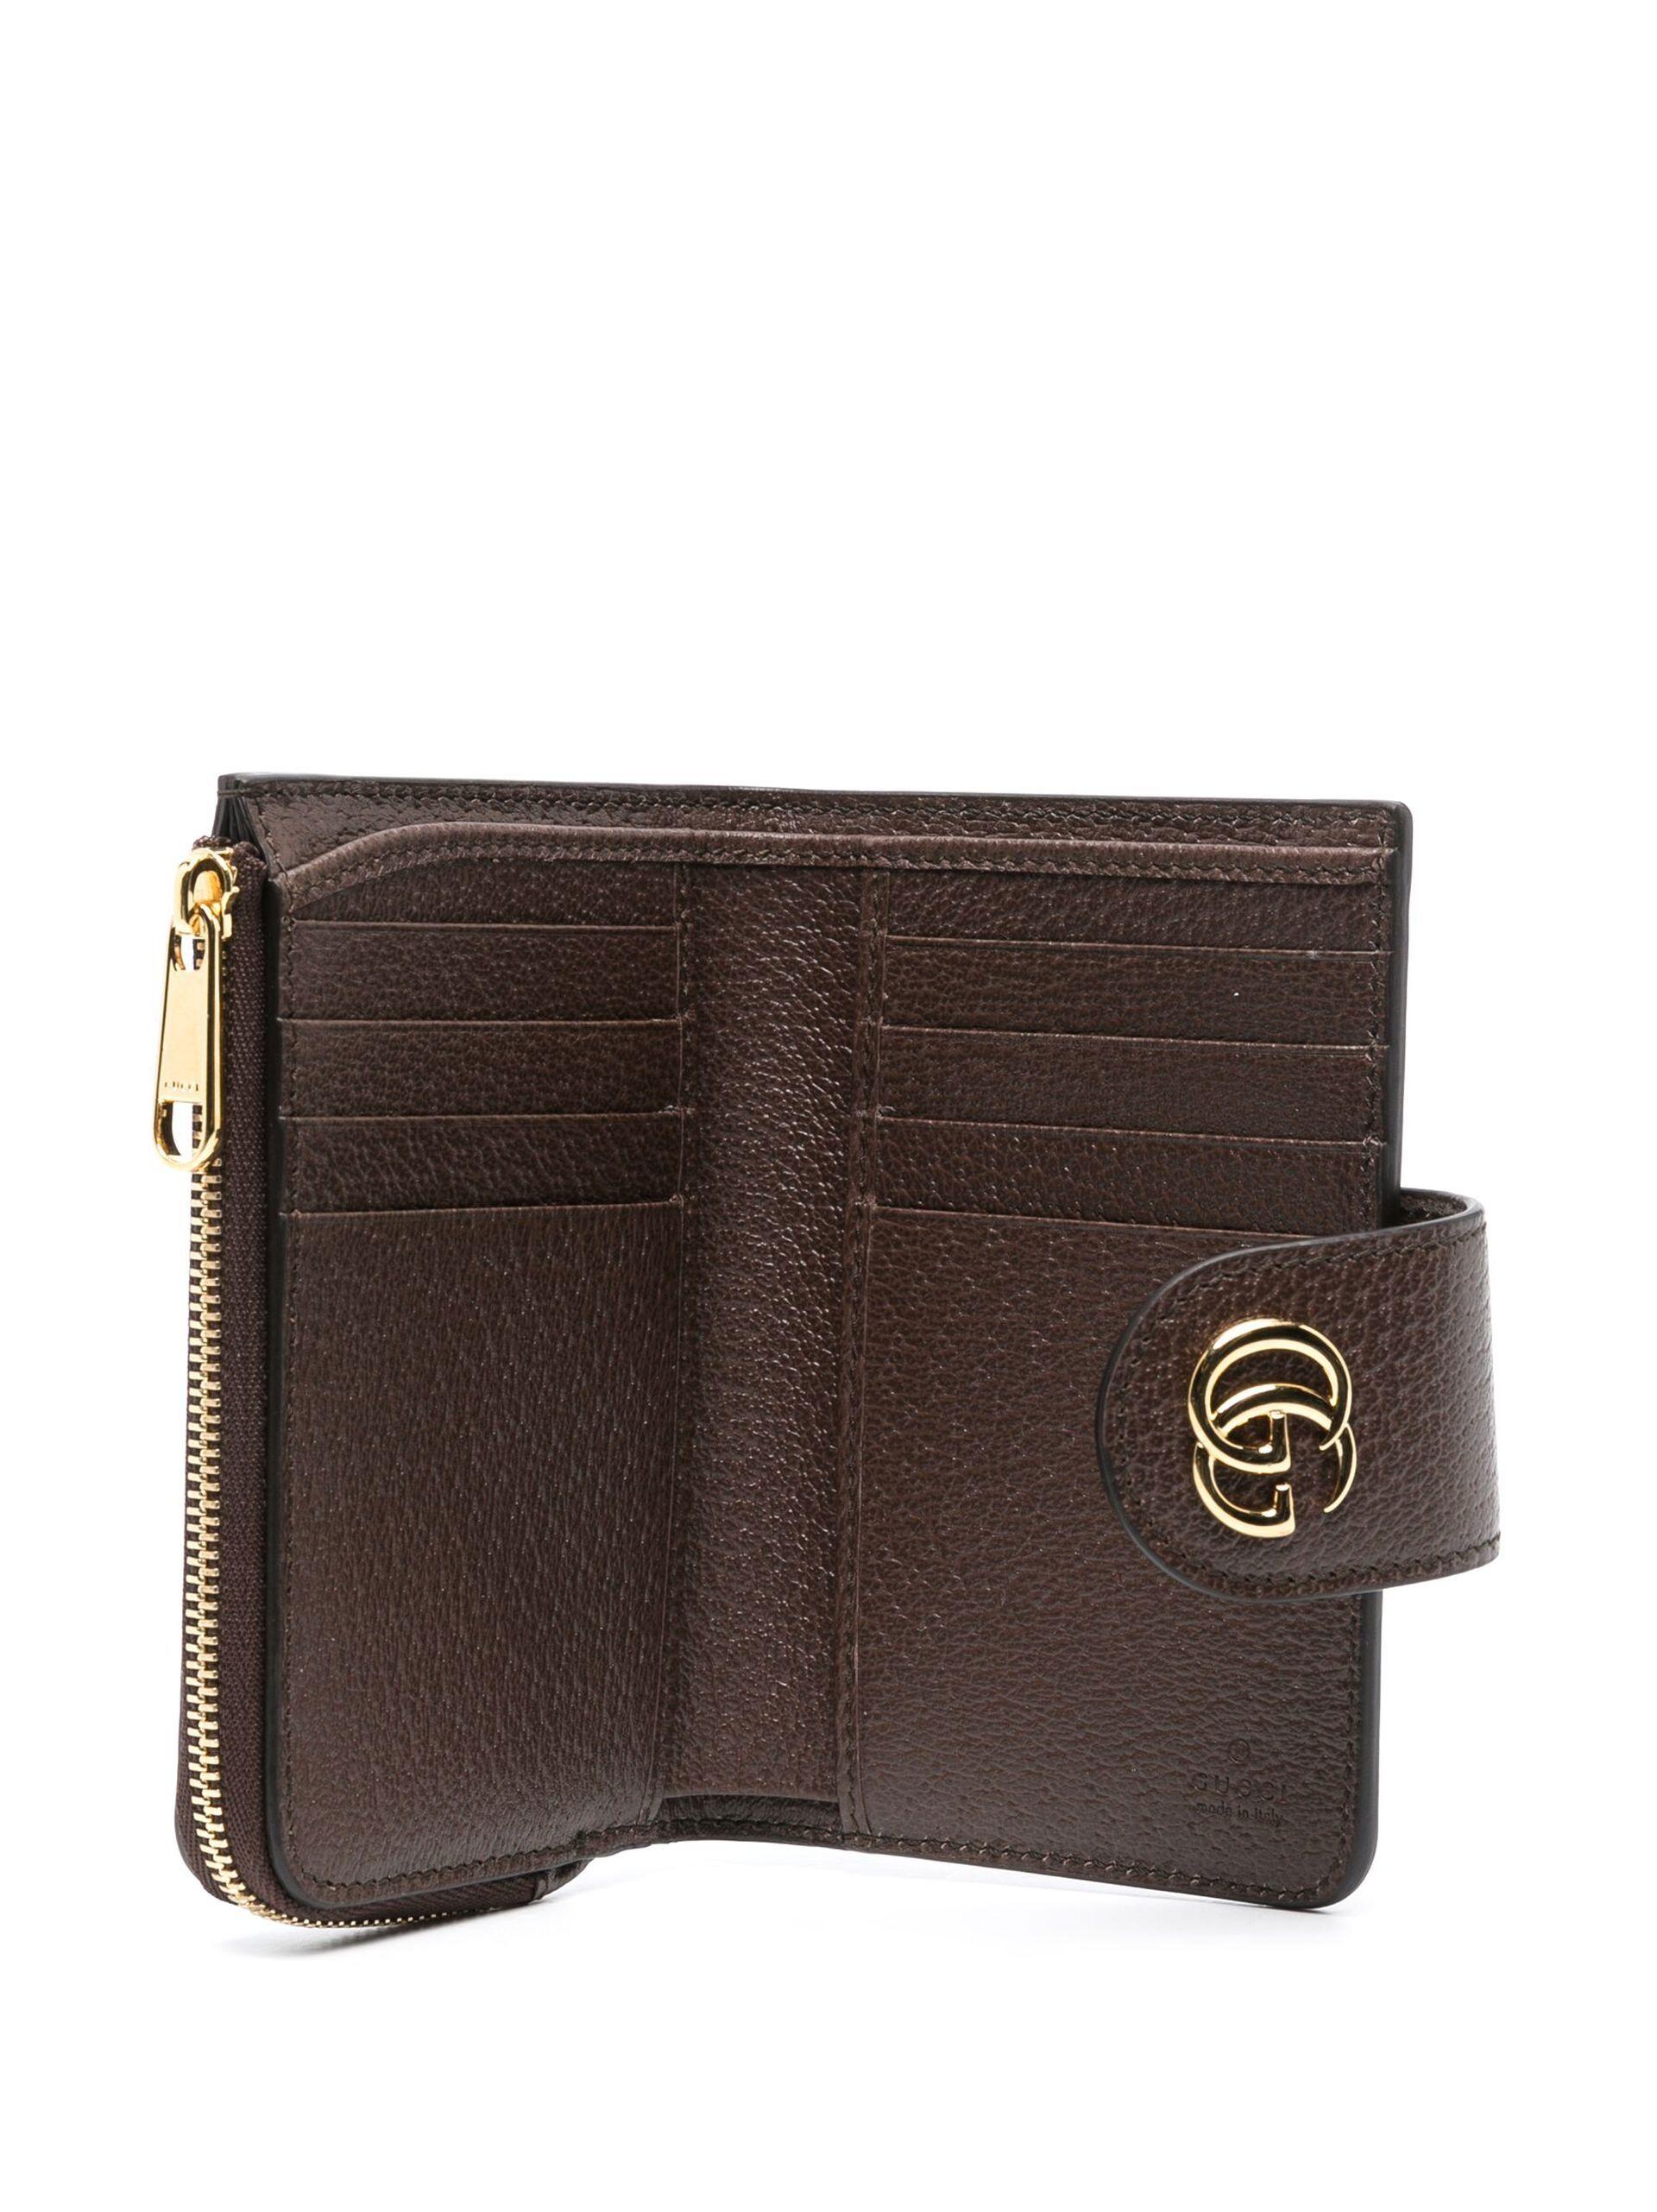 Gucci Neutral Ophidia Canvas Wallet in Gray | Lyst